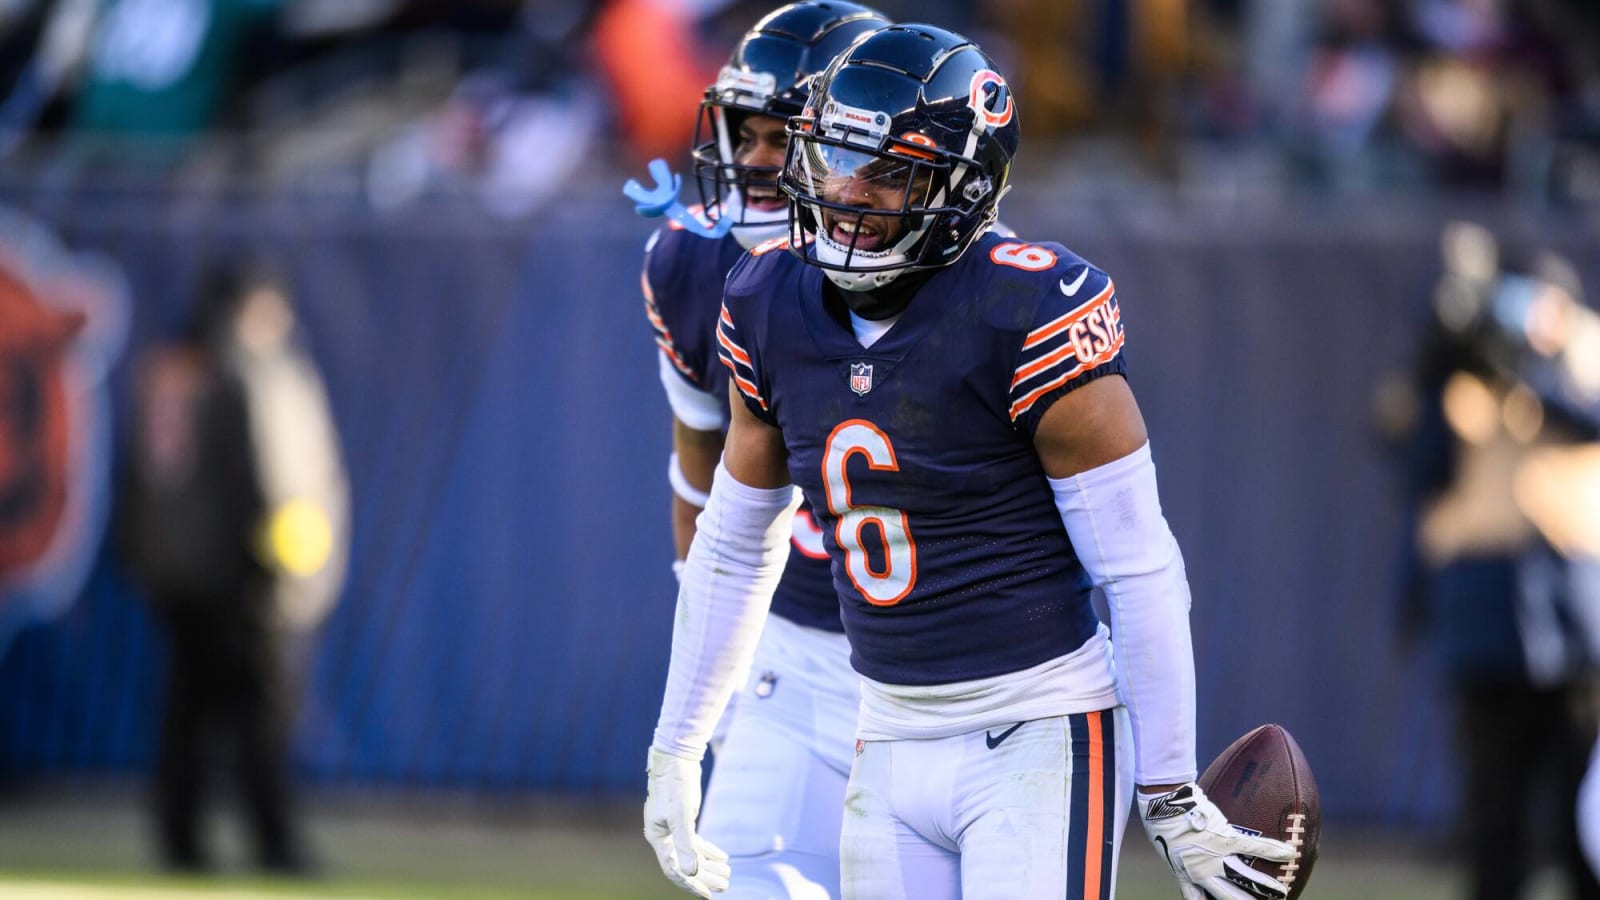 Chicago Bears: Gordon More Comfortable After A Turbulent Rookie Season